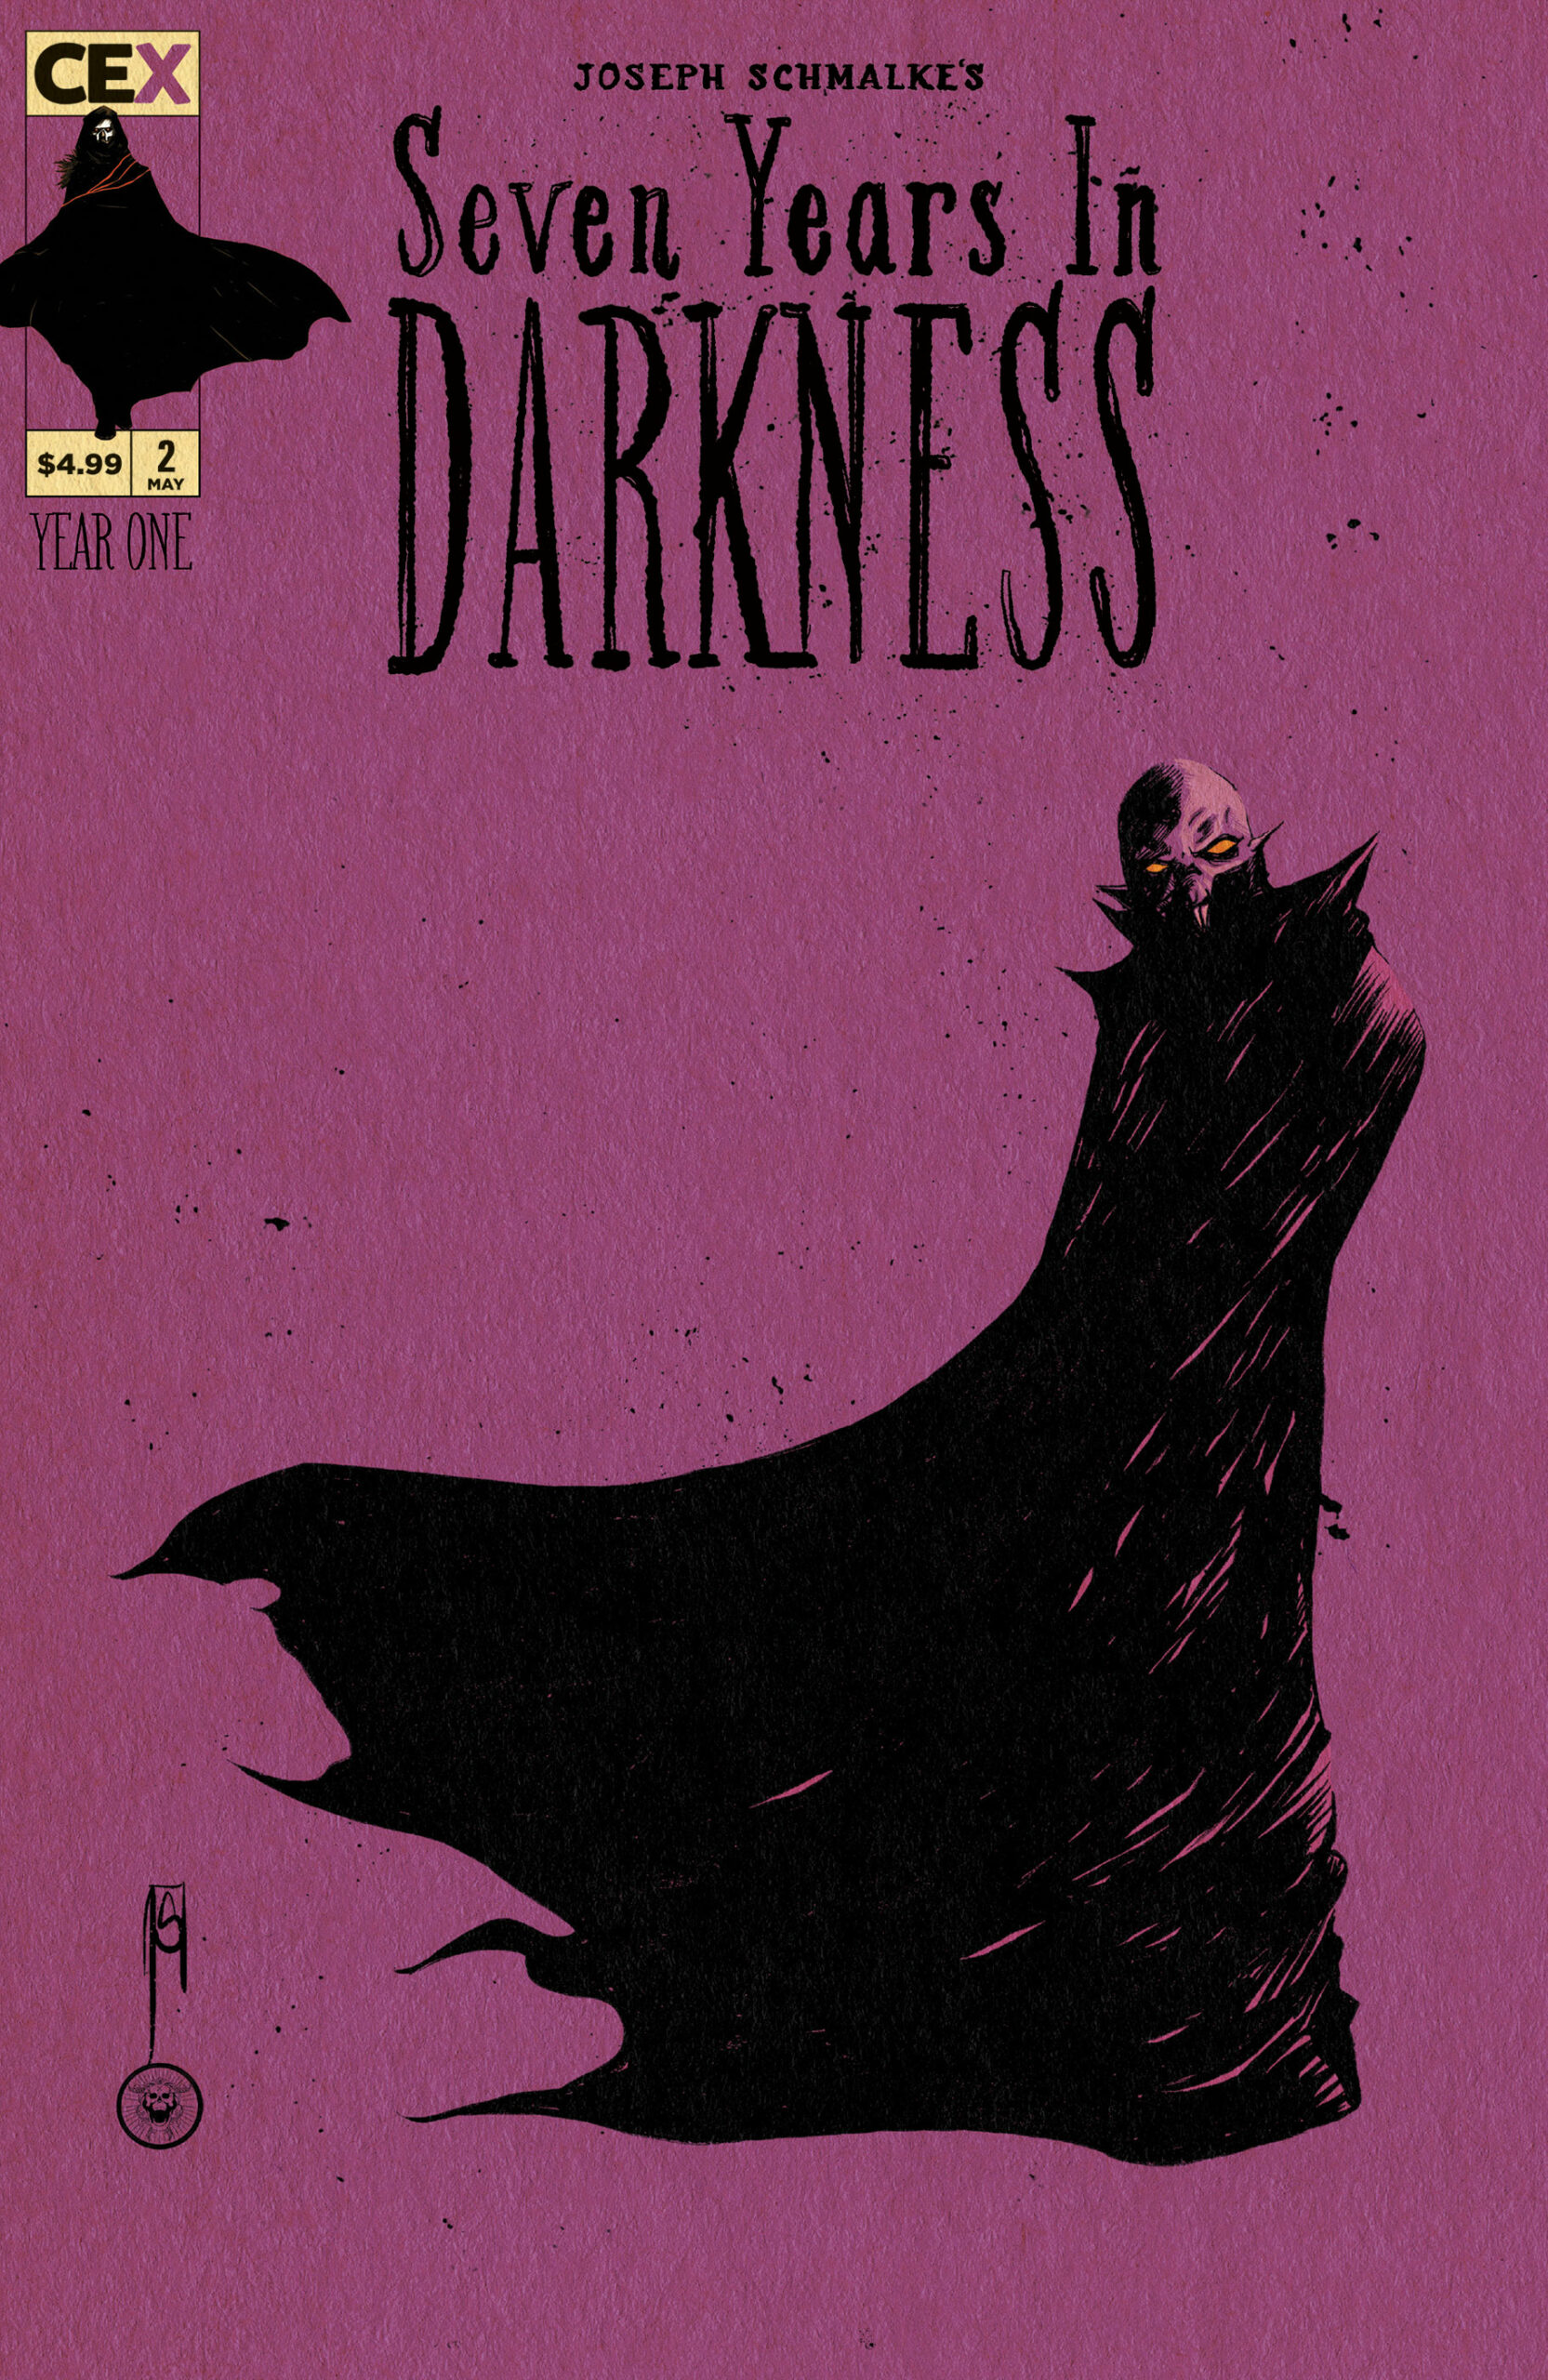 Seven Years in Darkness #2 - Cover A